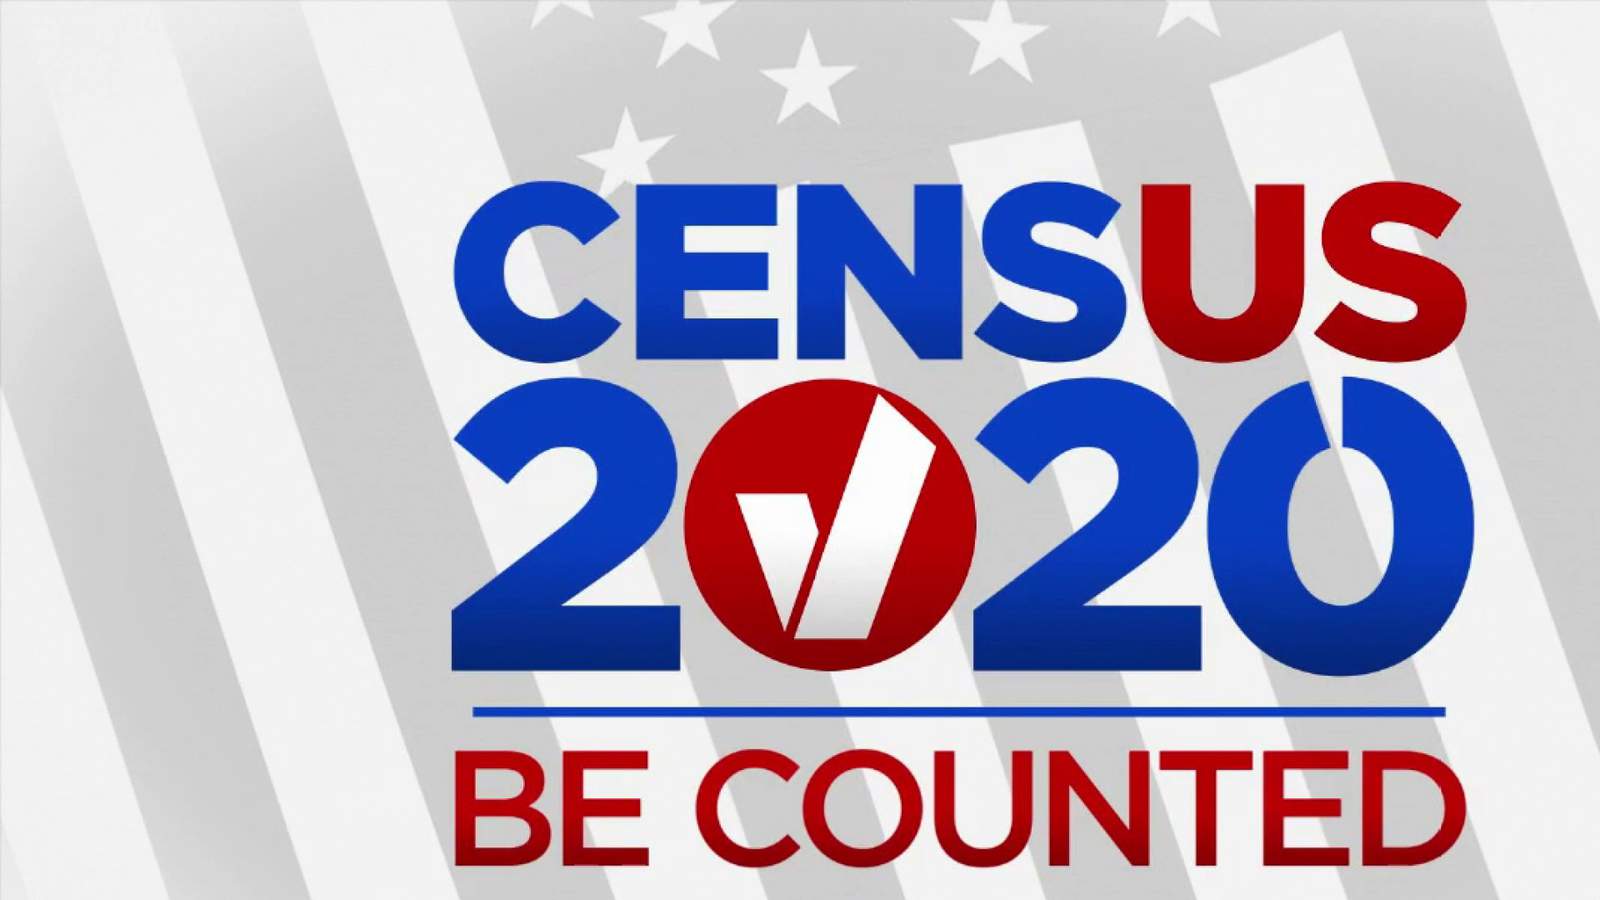 Community organizers create incentives for filling out 2020 Census through family-friendly events